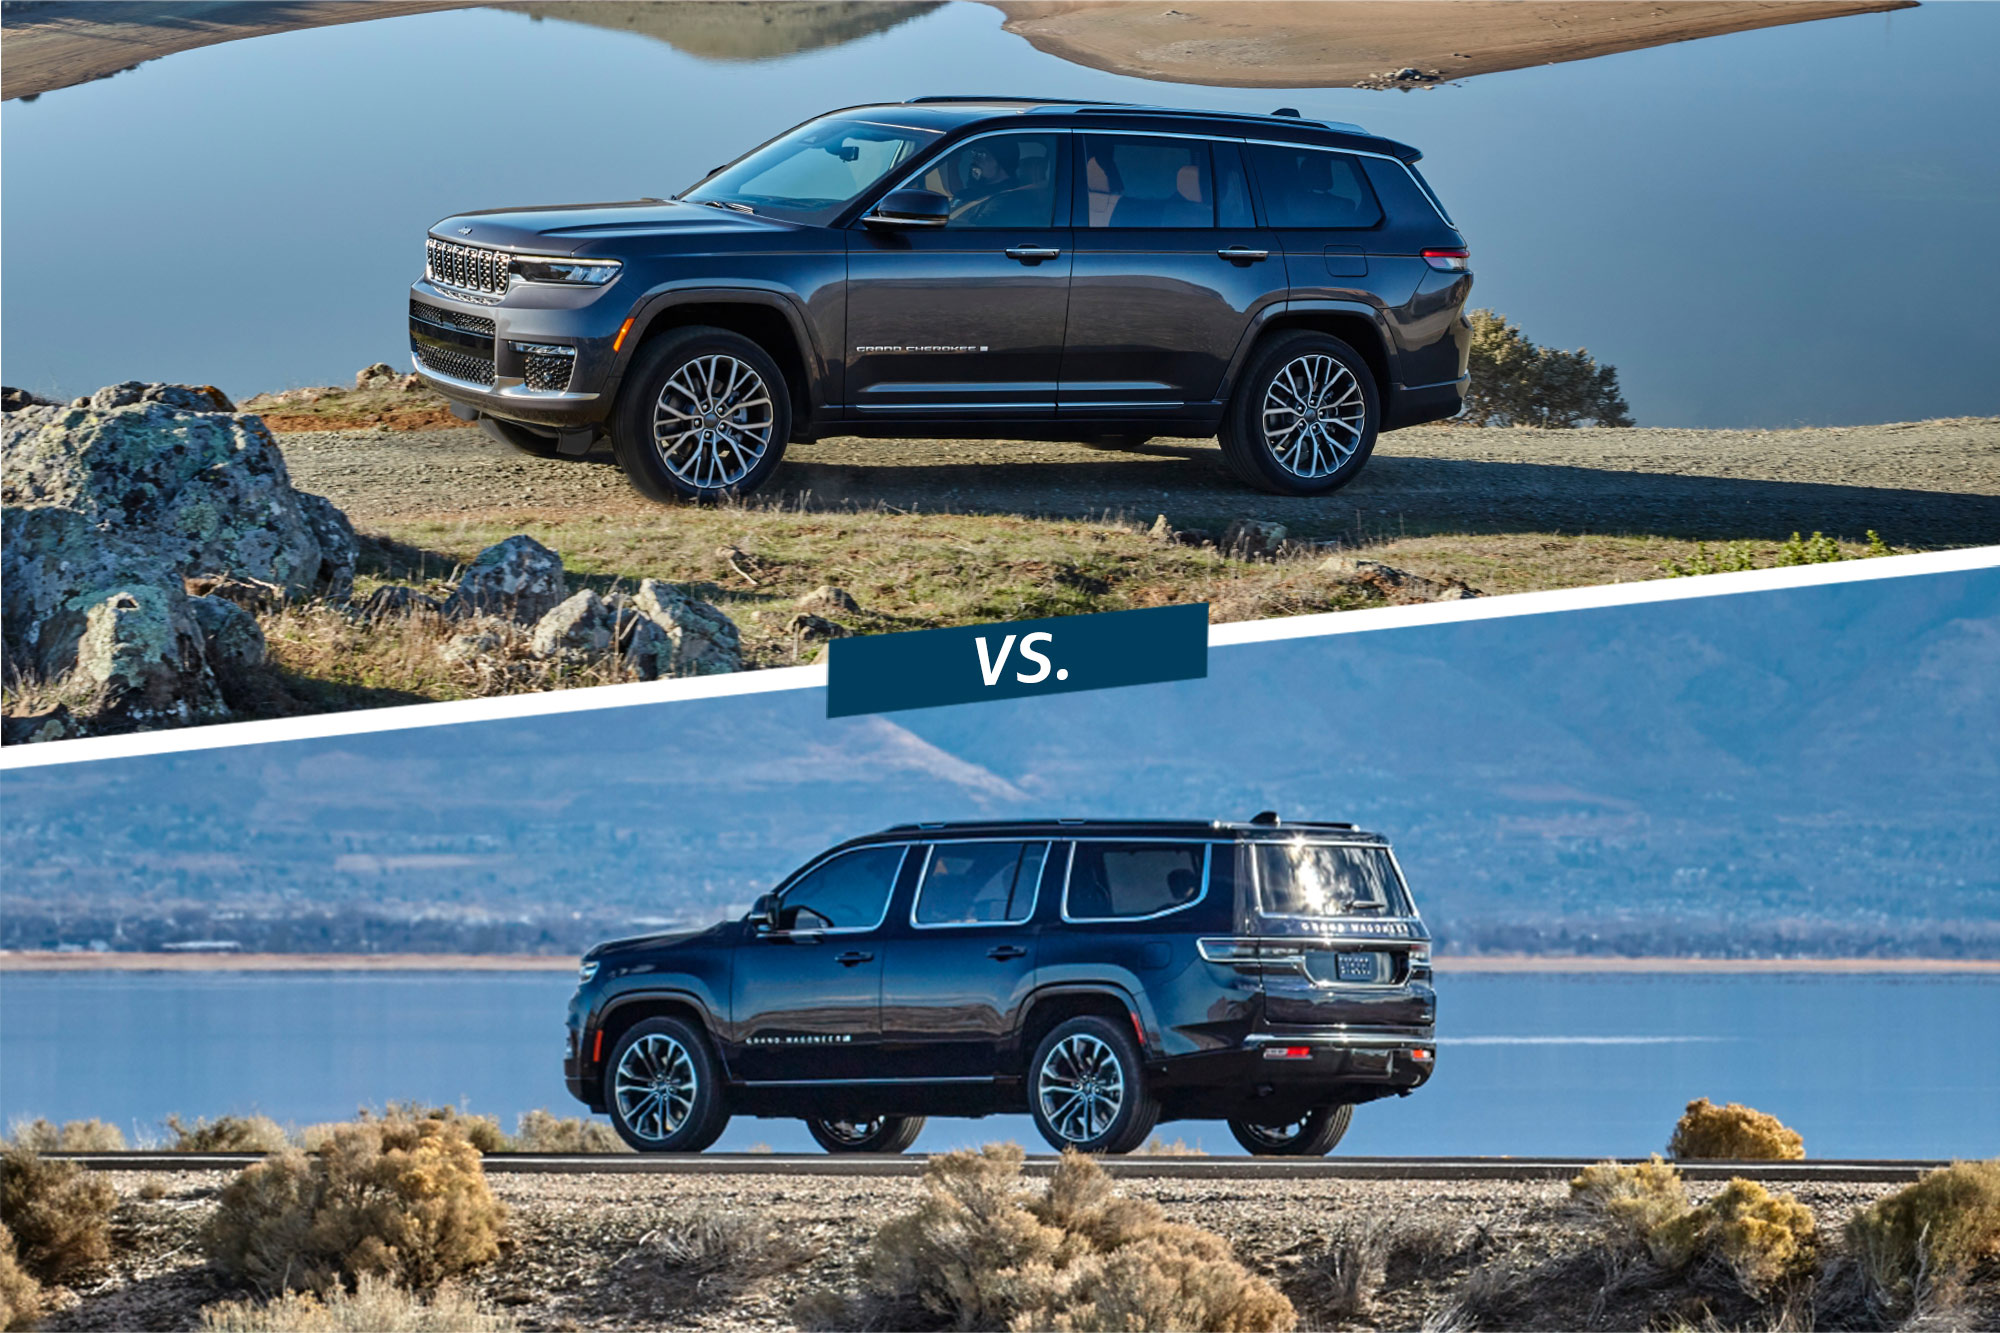 2023 Jeep Grand Cherokee Summit Reserve and 2023 Jeep Grand Wagoneer compared